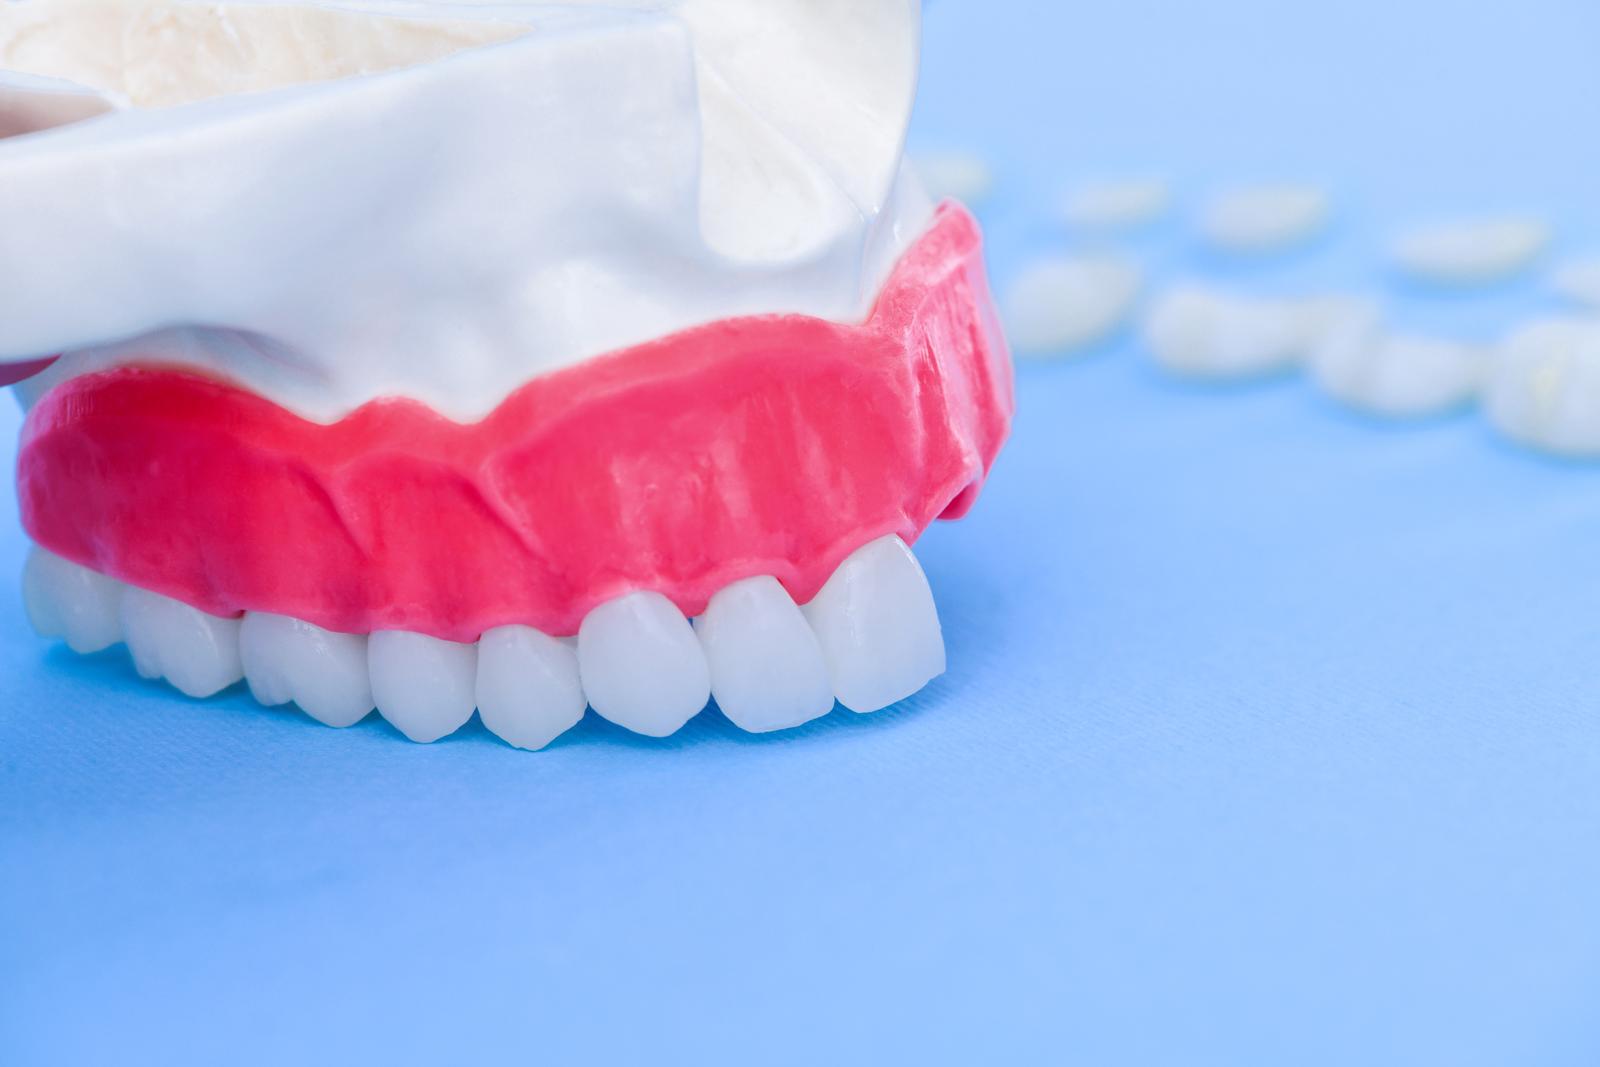 Find Out: Does Dental Insurance Cover Veneers?